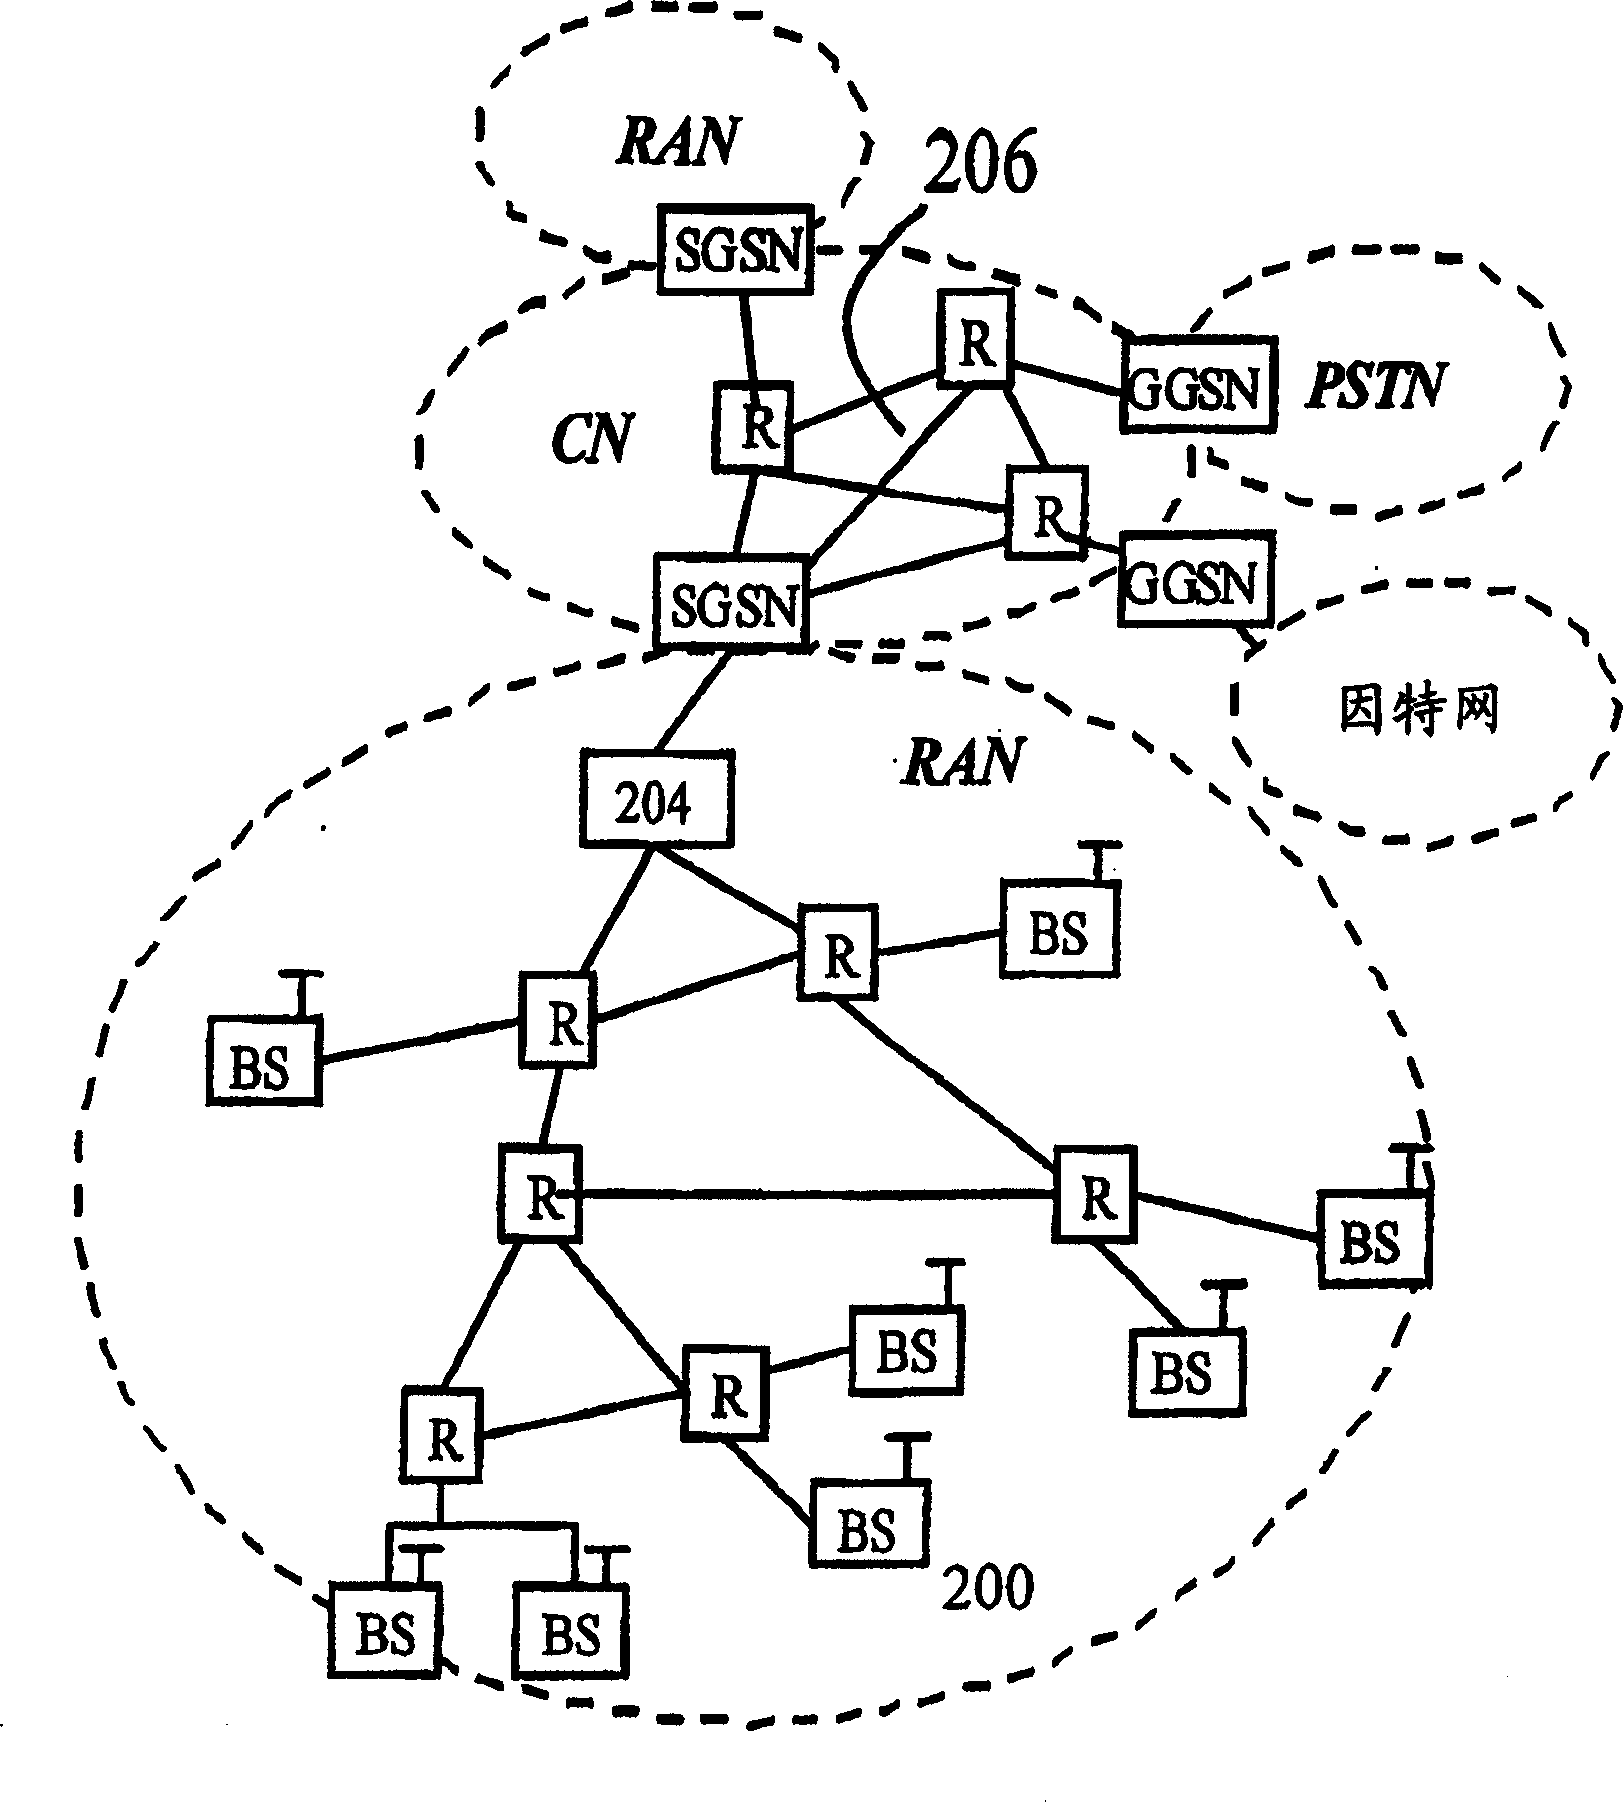 Network resource manager in a mobile telecommunication system